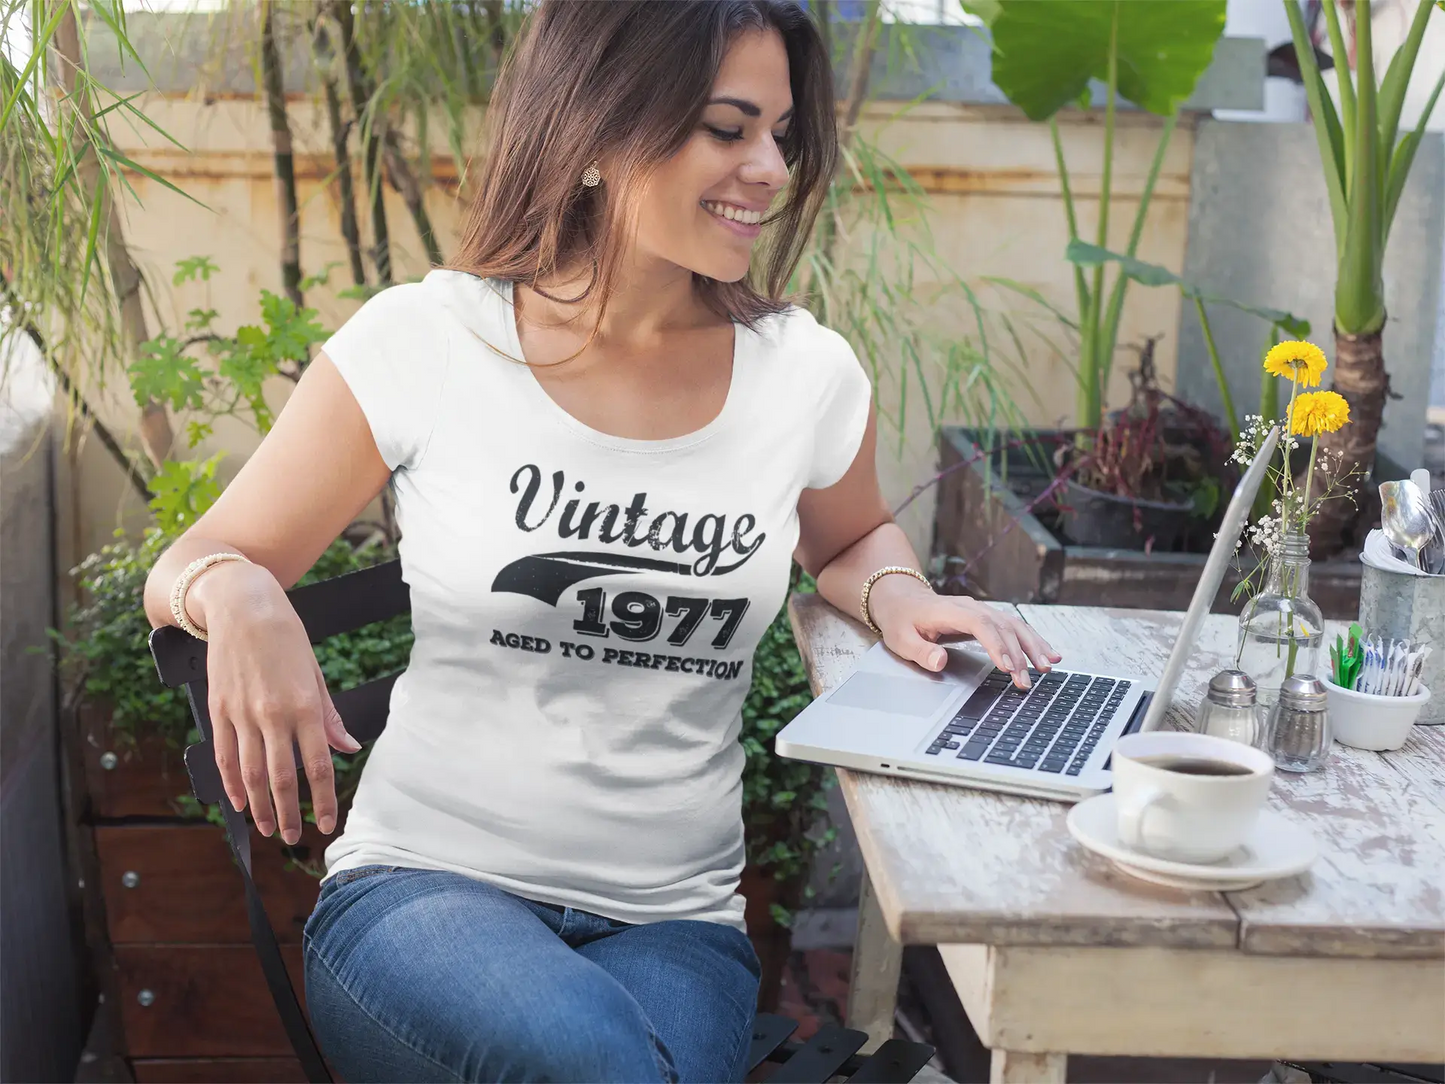 Vintage Aged To Perfection 1977, White, Women's Short Sleeve Round Neck T-shirt, gift t-shirt 00344